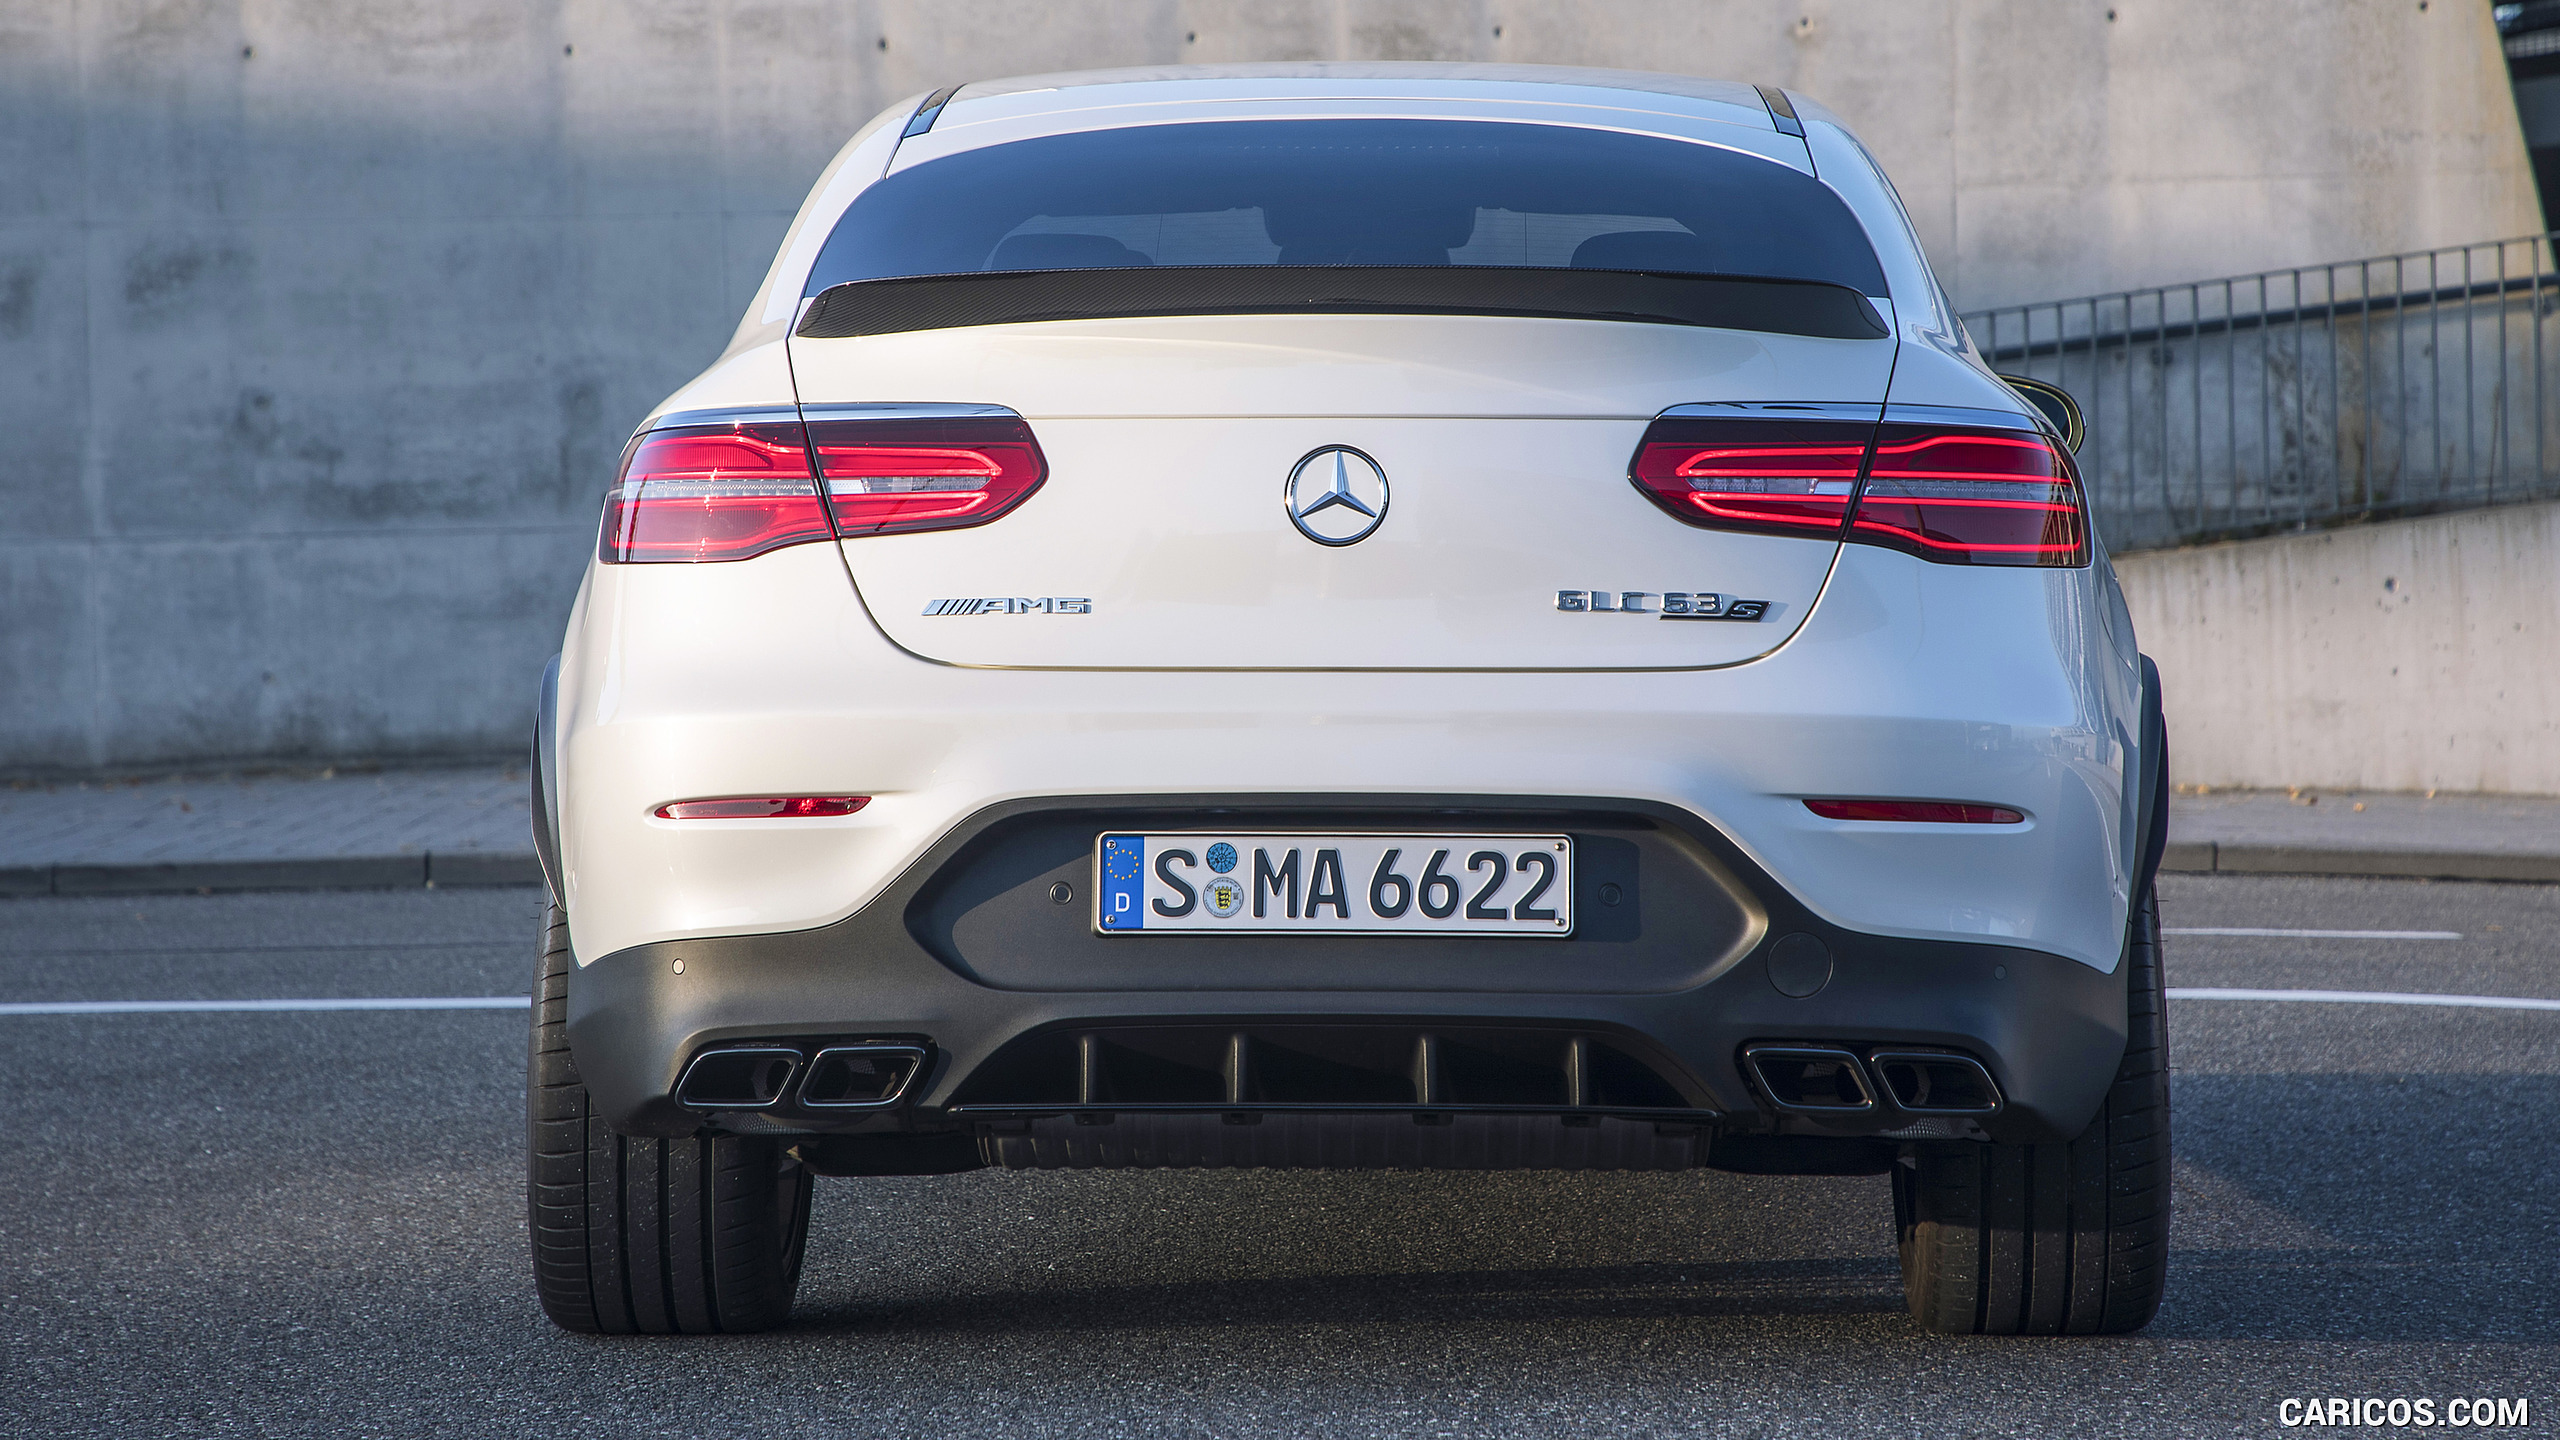 2018 Mercedes-AMG GLC 63 S Coupe - Rear, #55 of 75